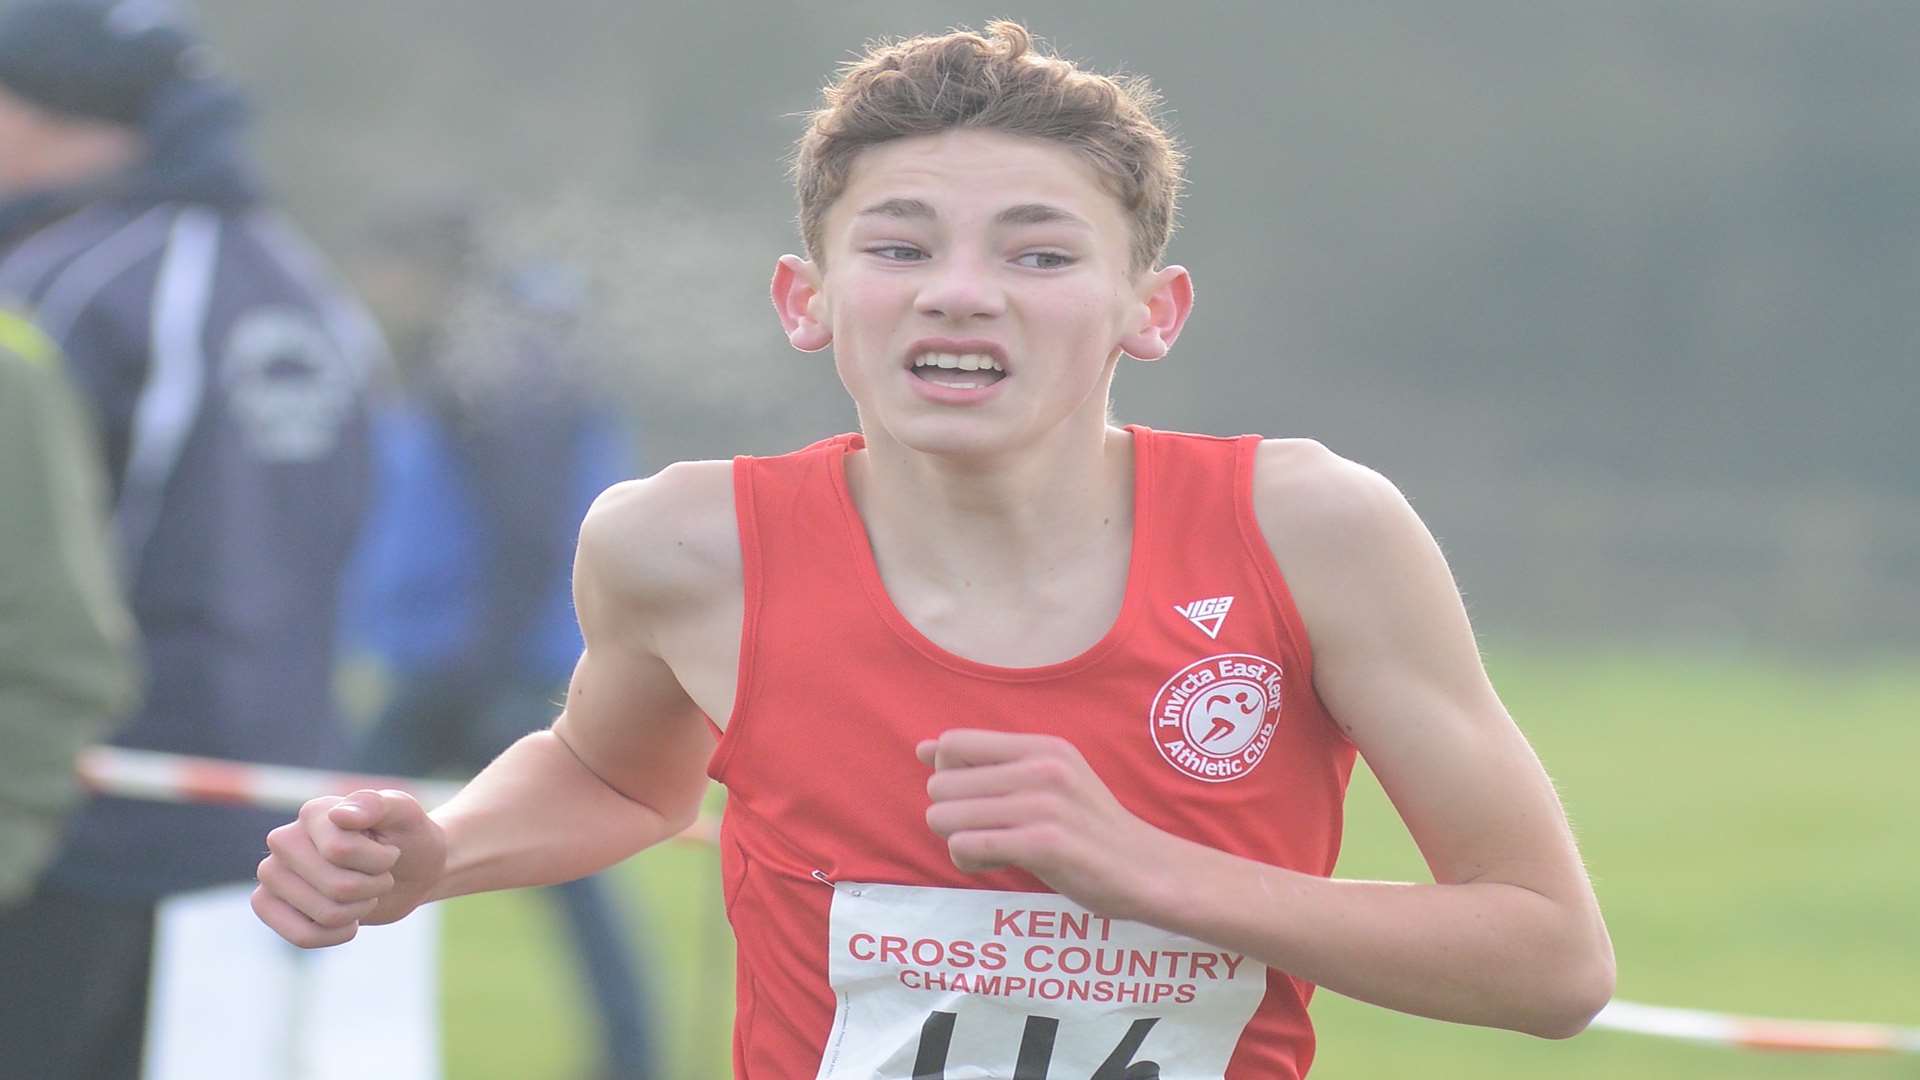 Jamie Keir made it a win double for Invicta East Kent with victory in the under-13 boys' race Picture: Gary Browne